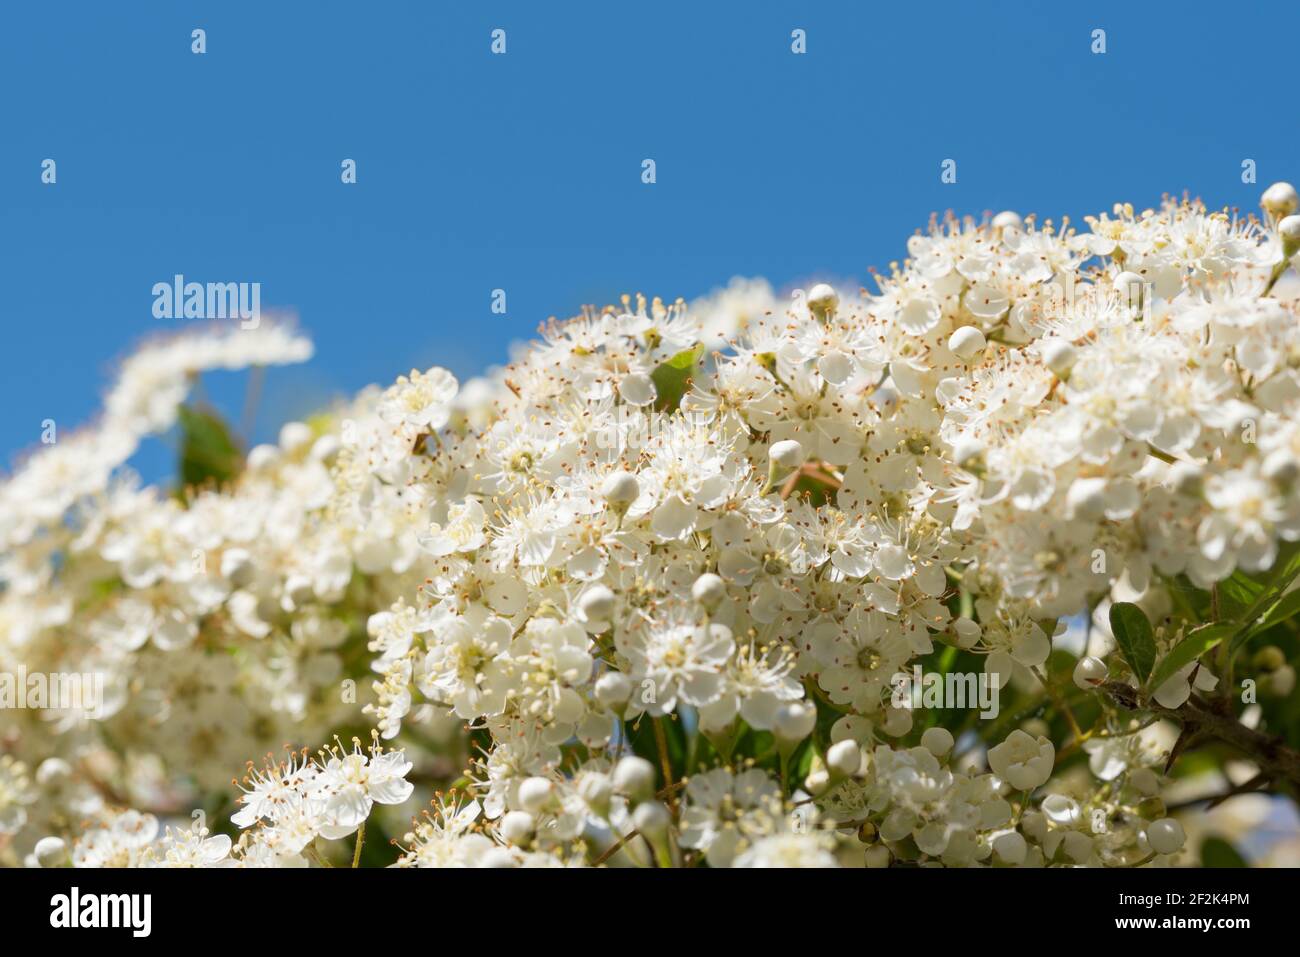 The flowers of a firethorn, or pyracantha, in a garden in Exeter, Devon, UK. Stock Photo